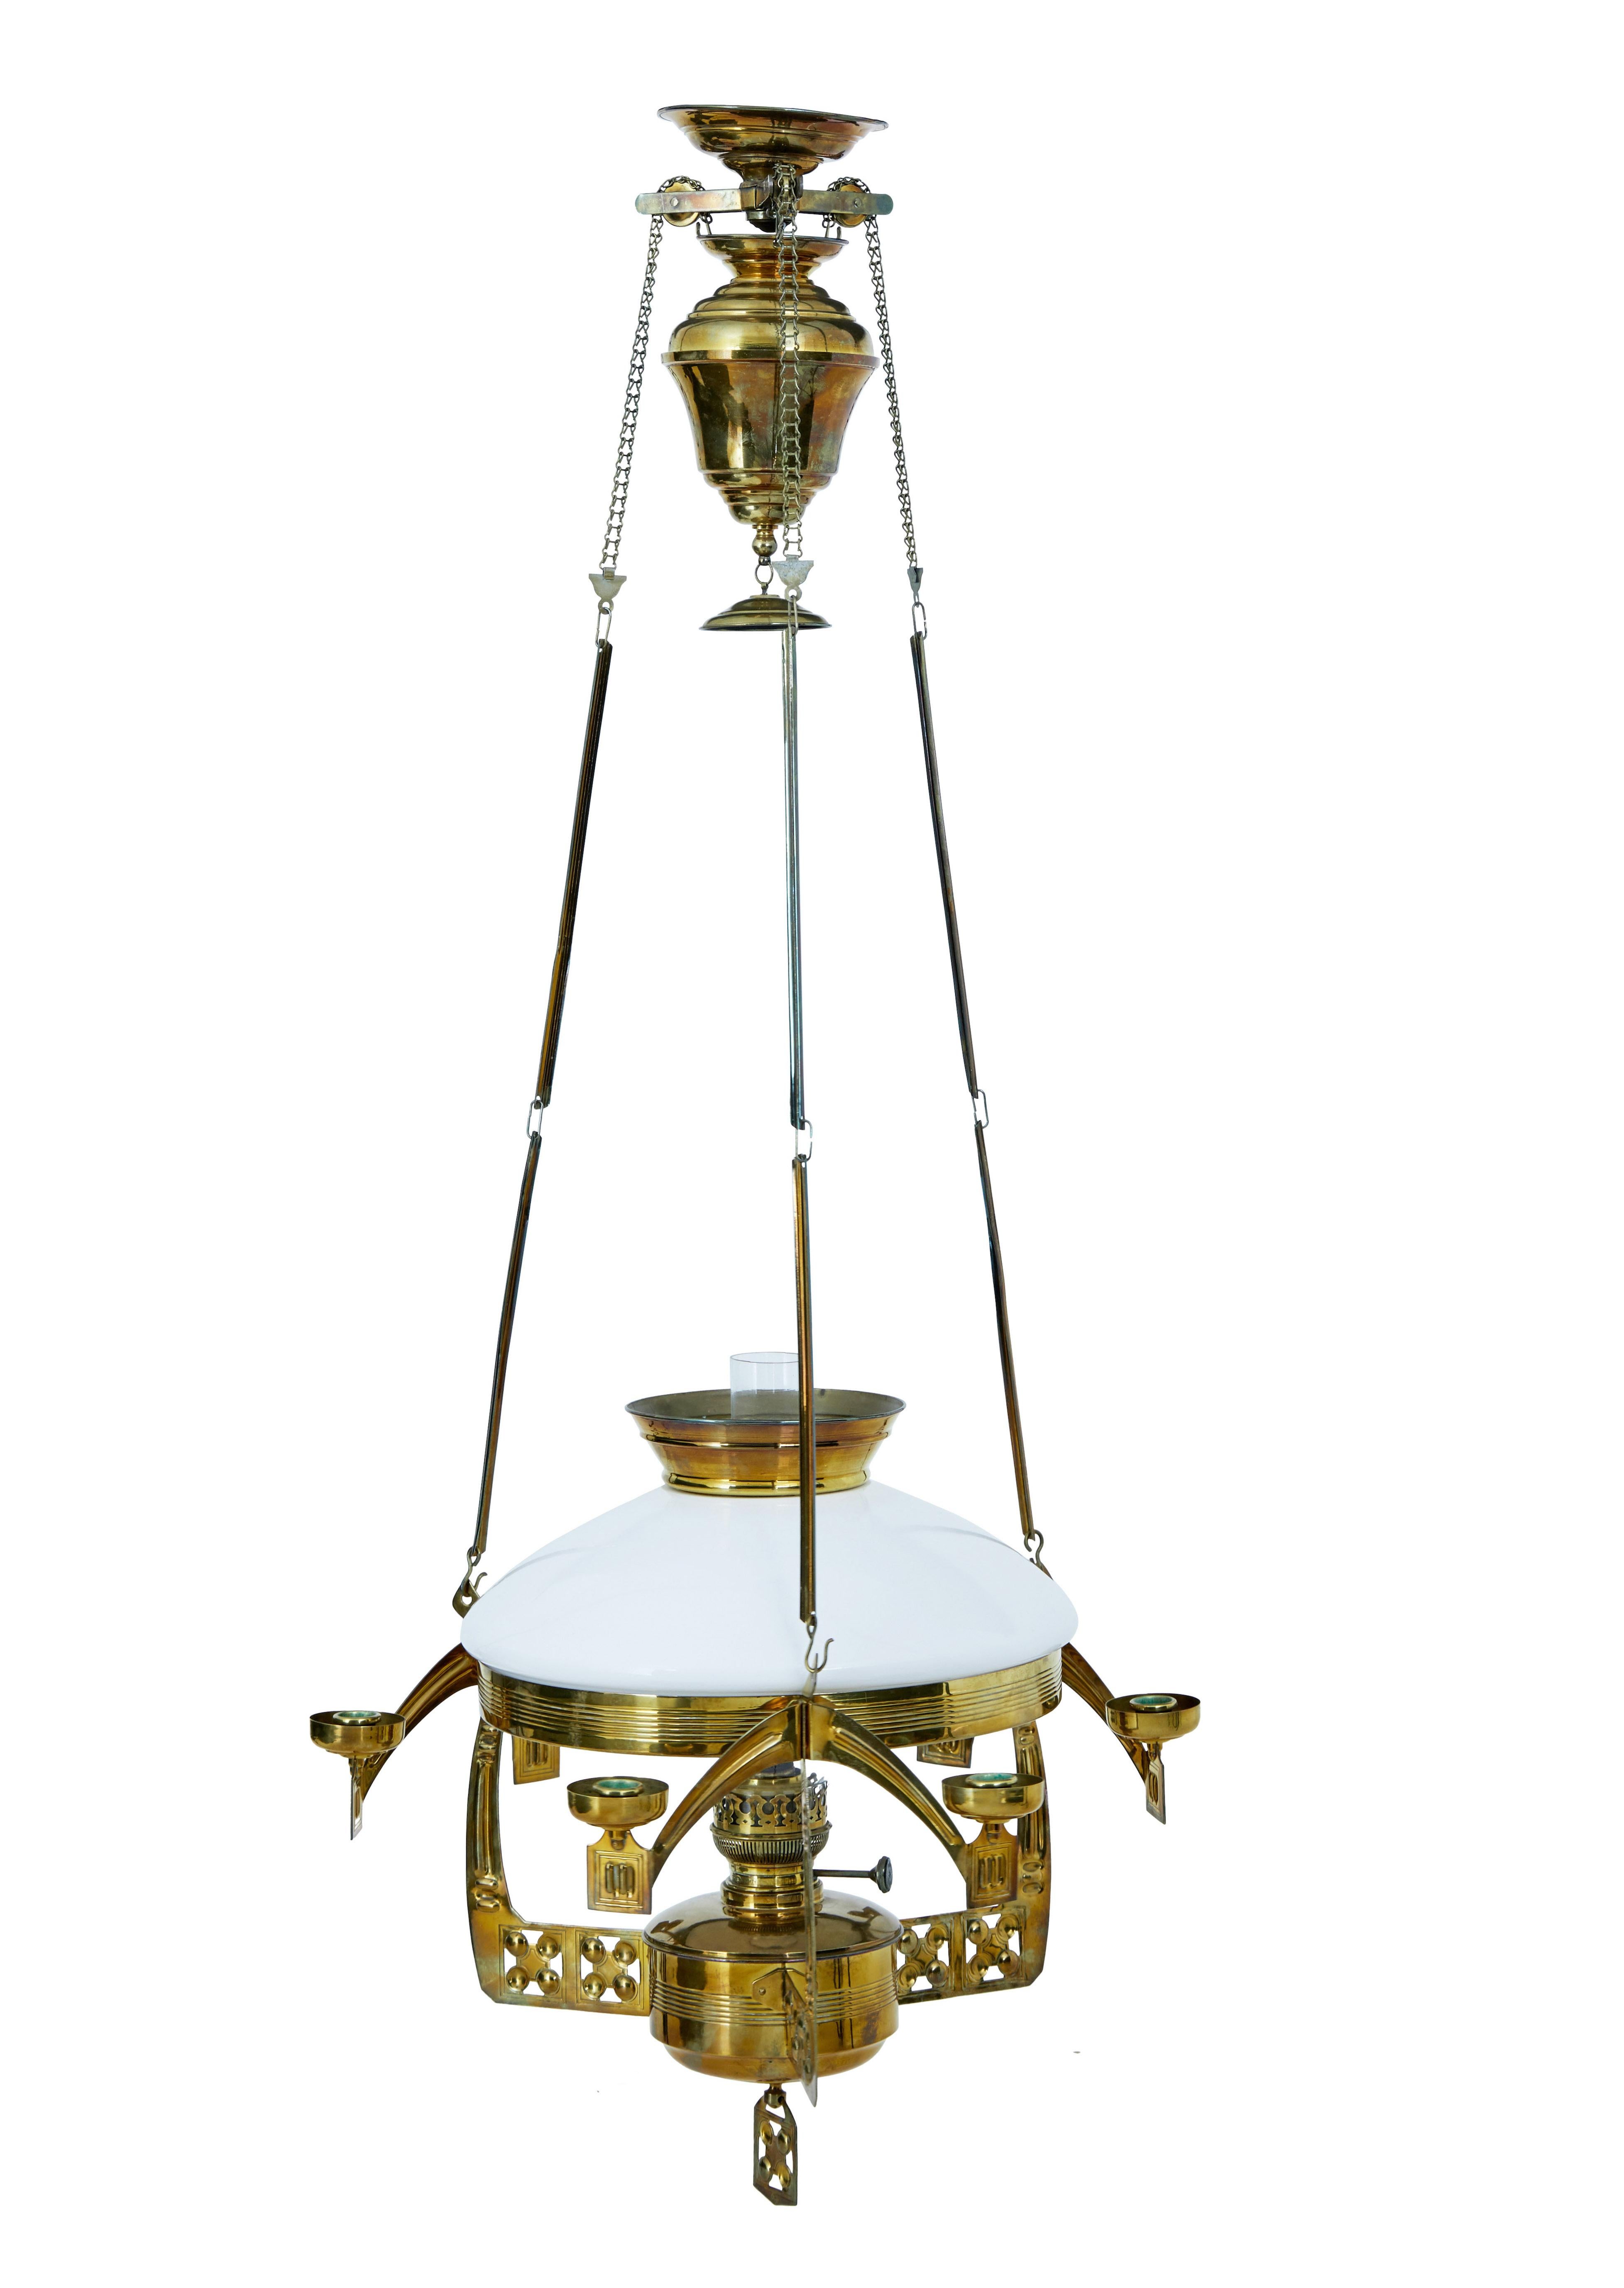 Fine quality arts and crafts rise and fall hanging oil lamp.

Strong in the arts and crafts design, all original parts present.  3 arm main body, each with a pair of additional candle holders.

White opaline glass bowl.  Suspended by 3 links to the